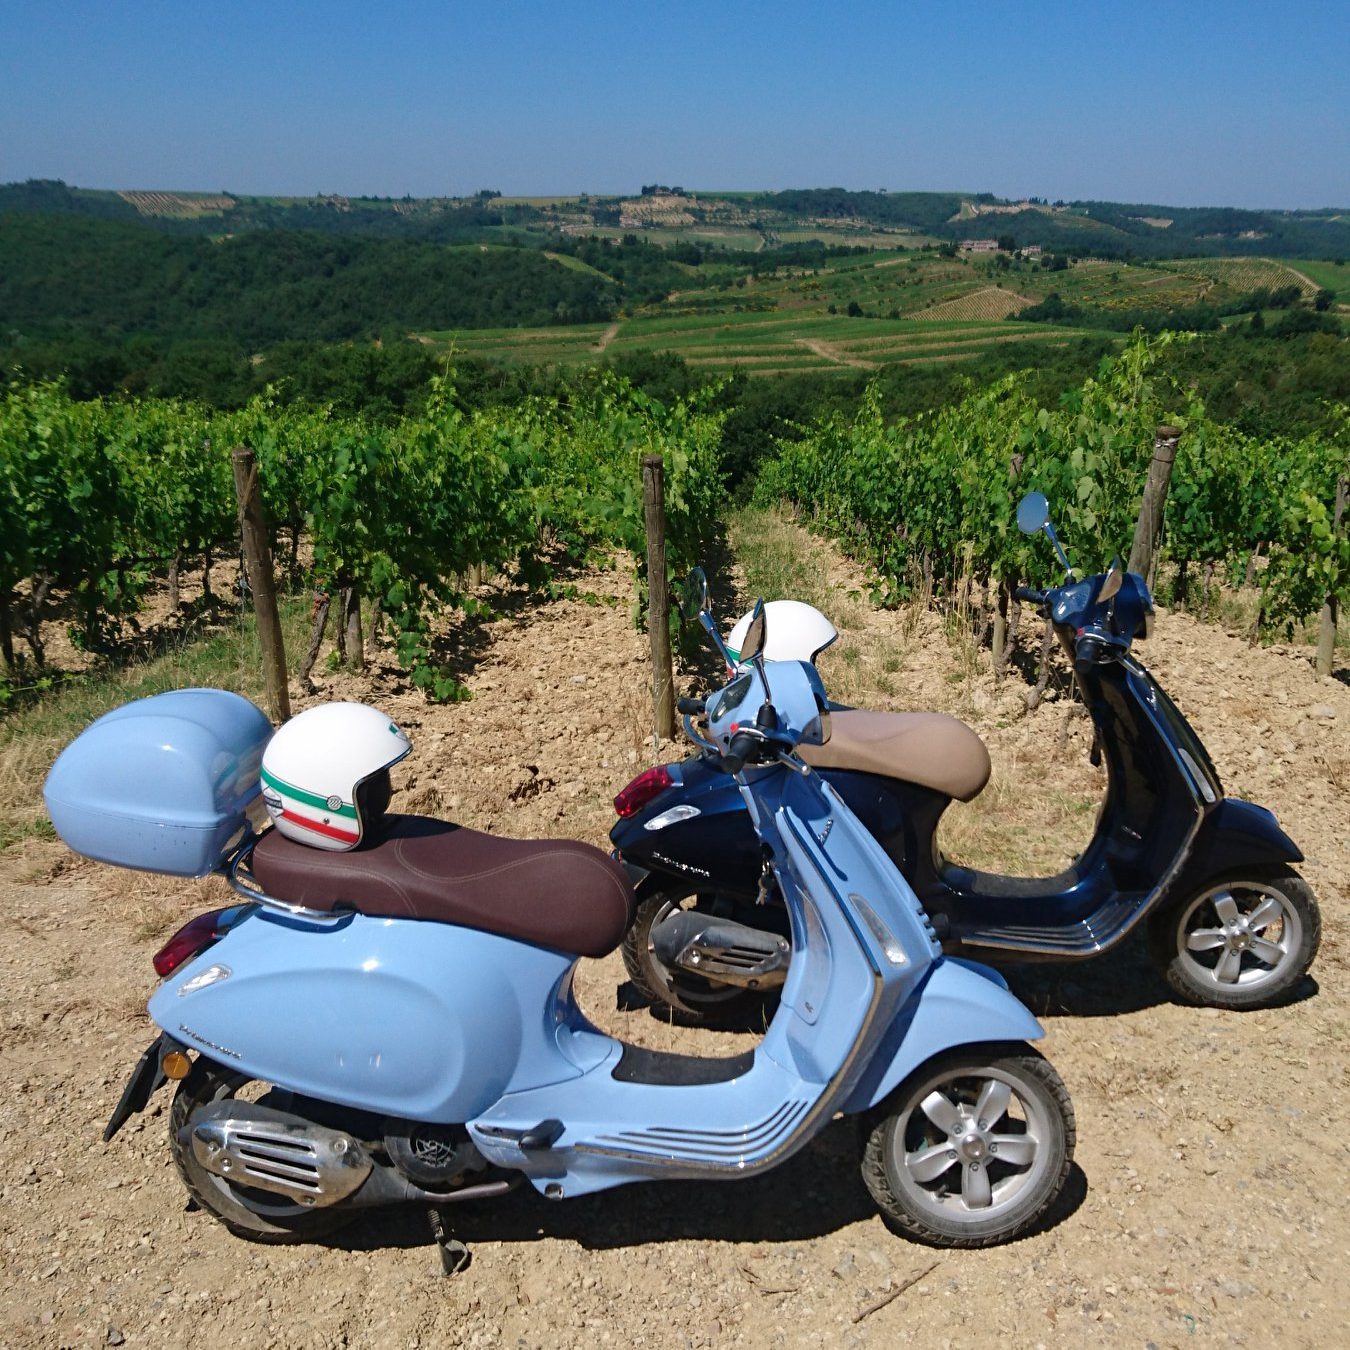 Real freedom in the vineyards in tuscany